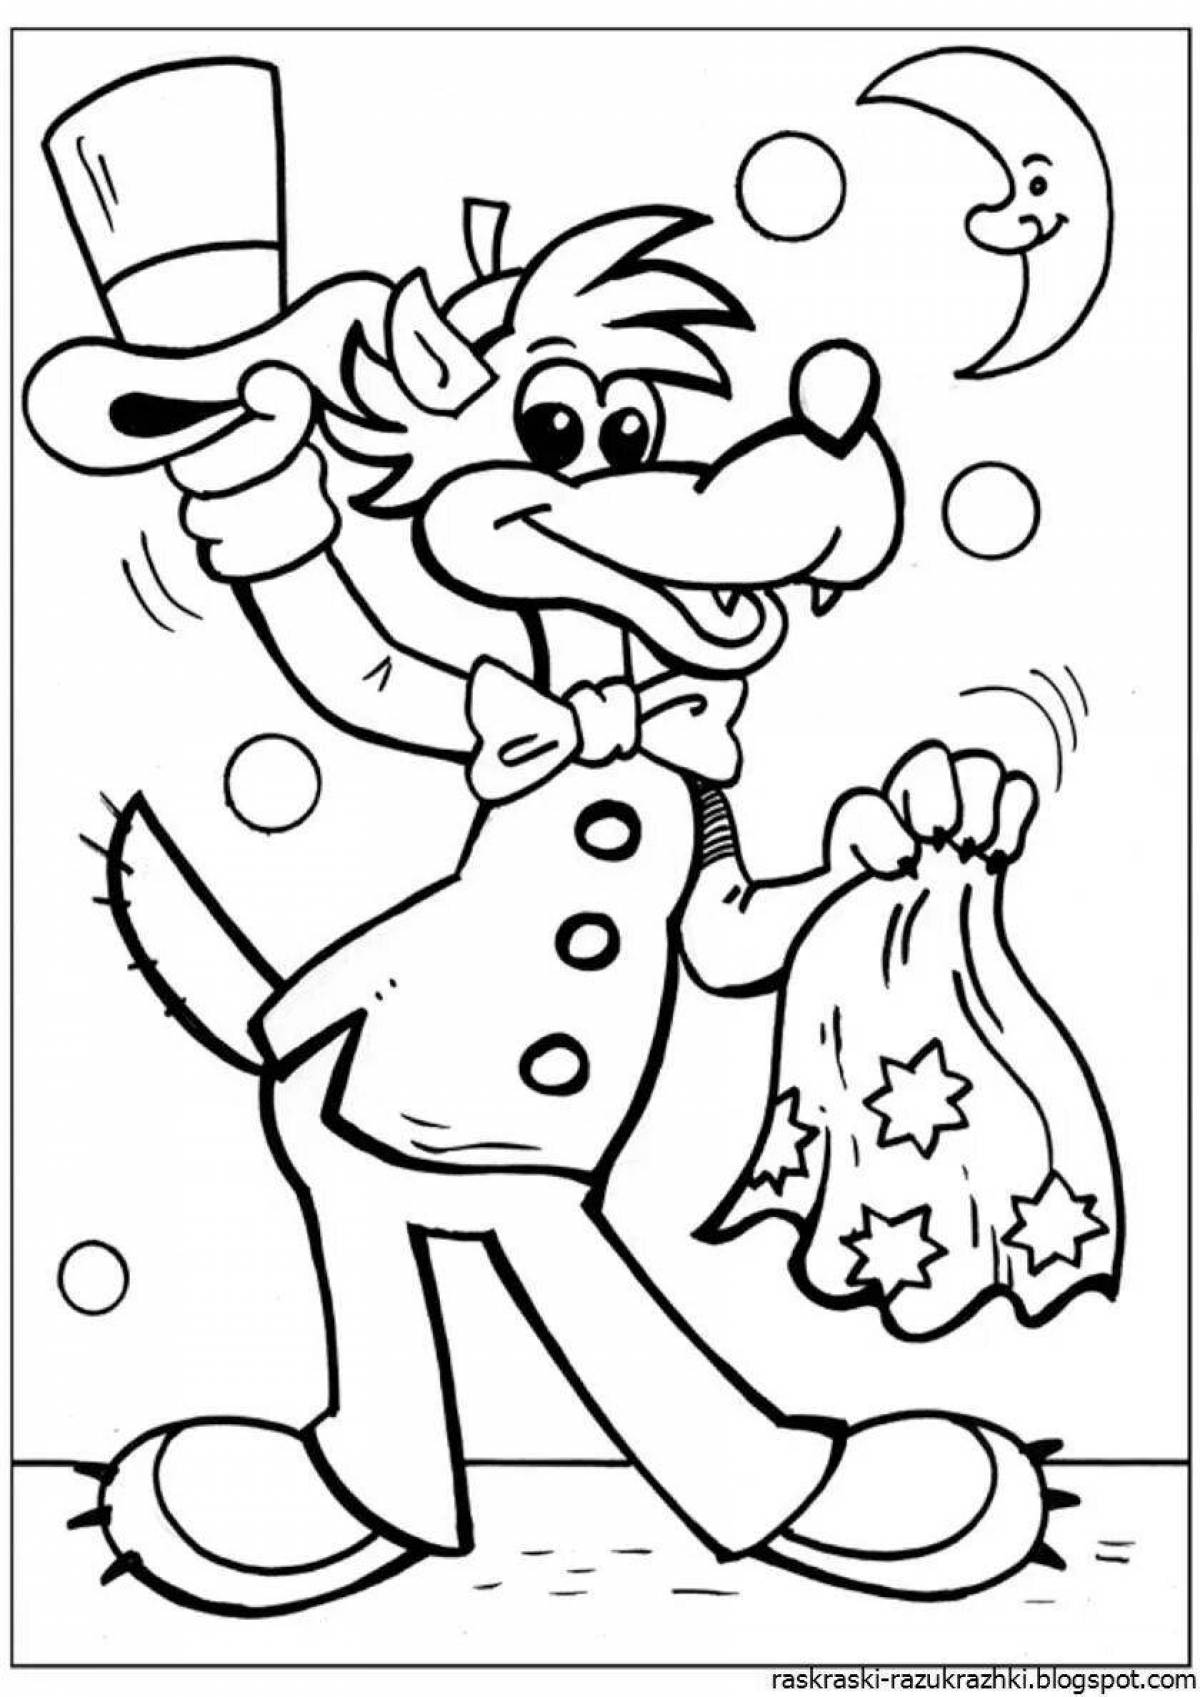 Color-explosion coloring page ok for kids